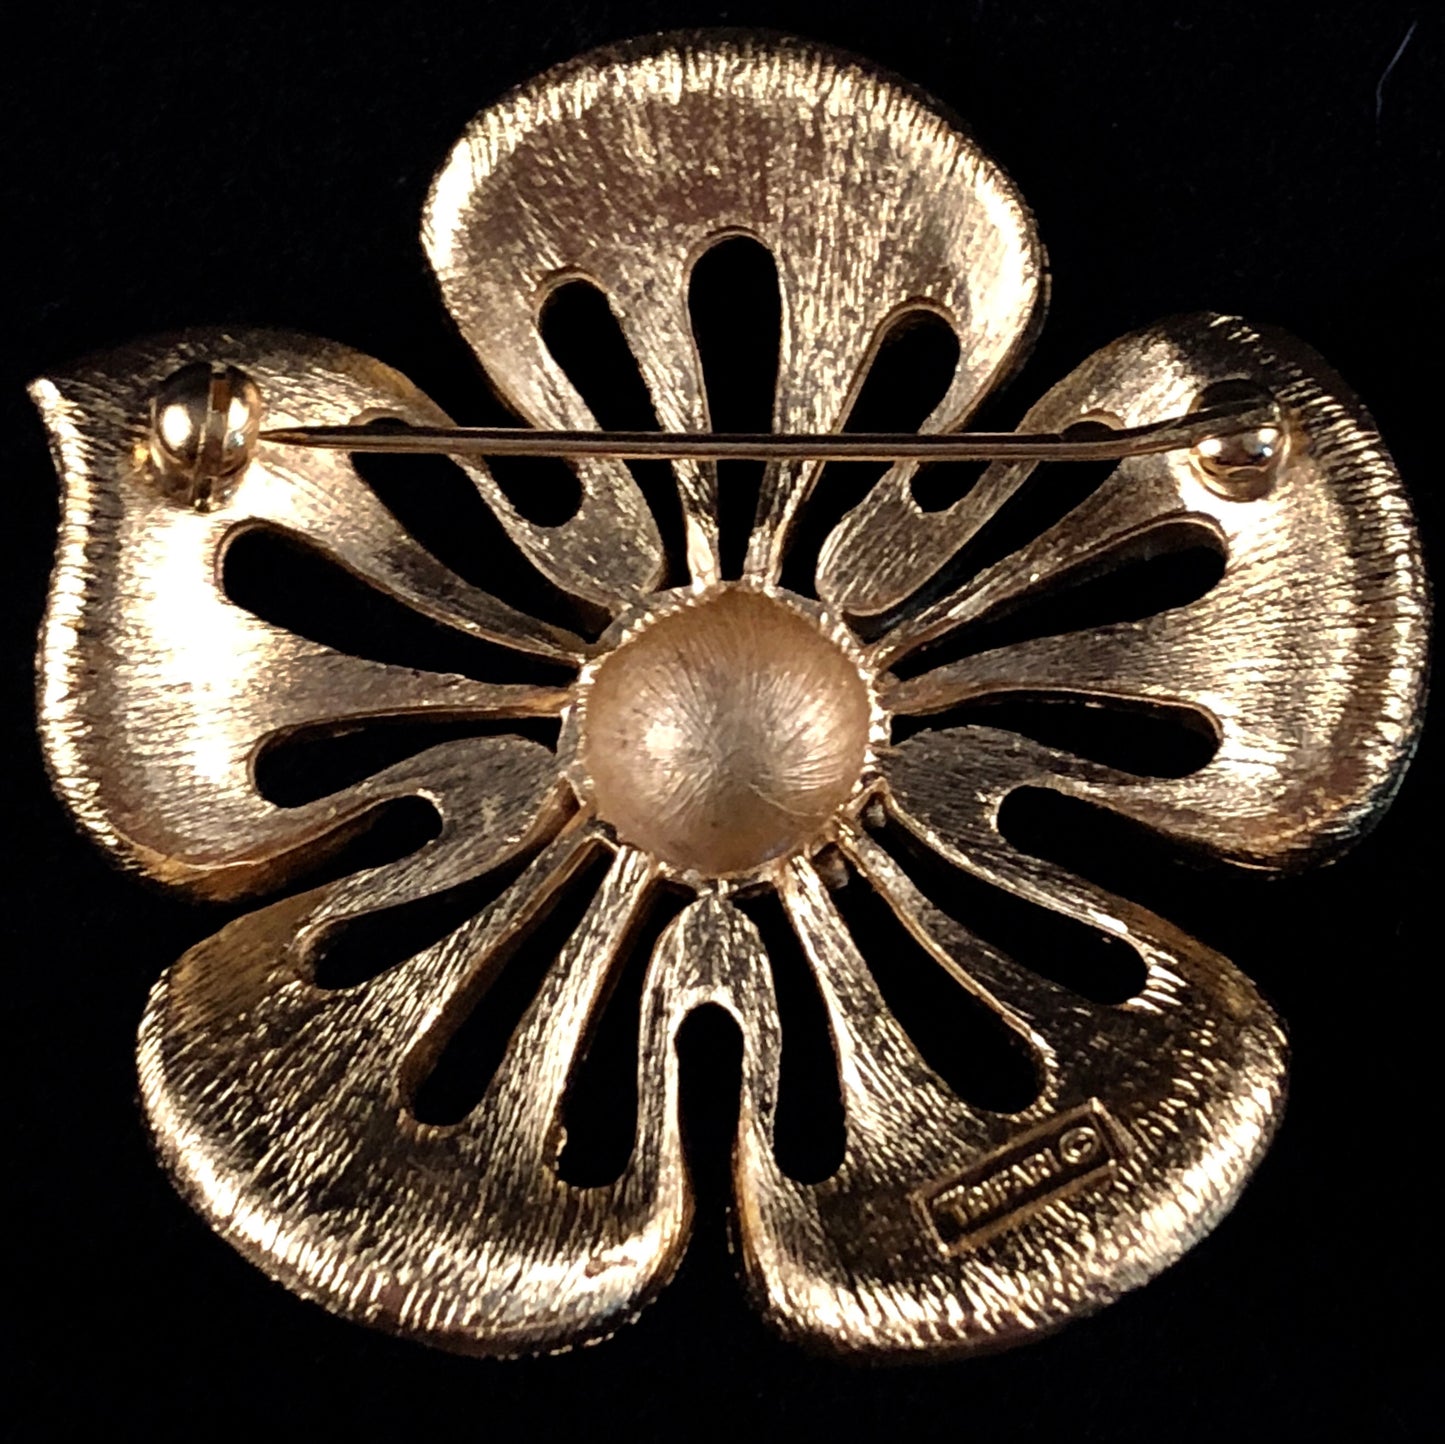 Late 60s/ Early 70s Trifari Flower Brooch - Retro Kandy Vintage